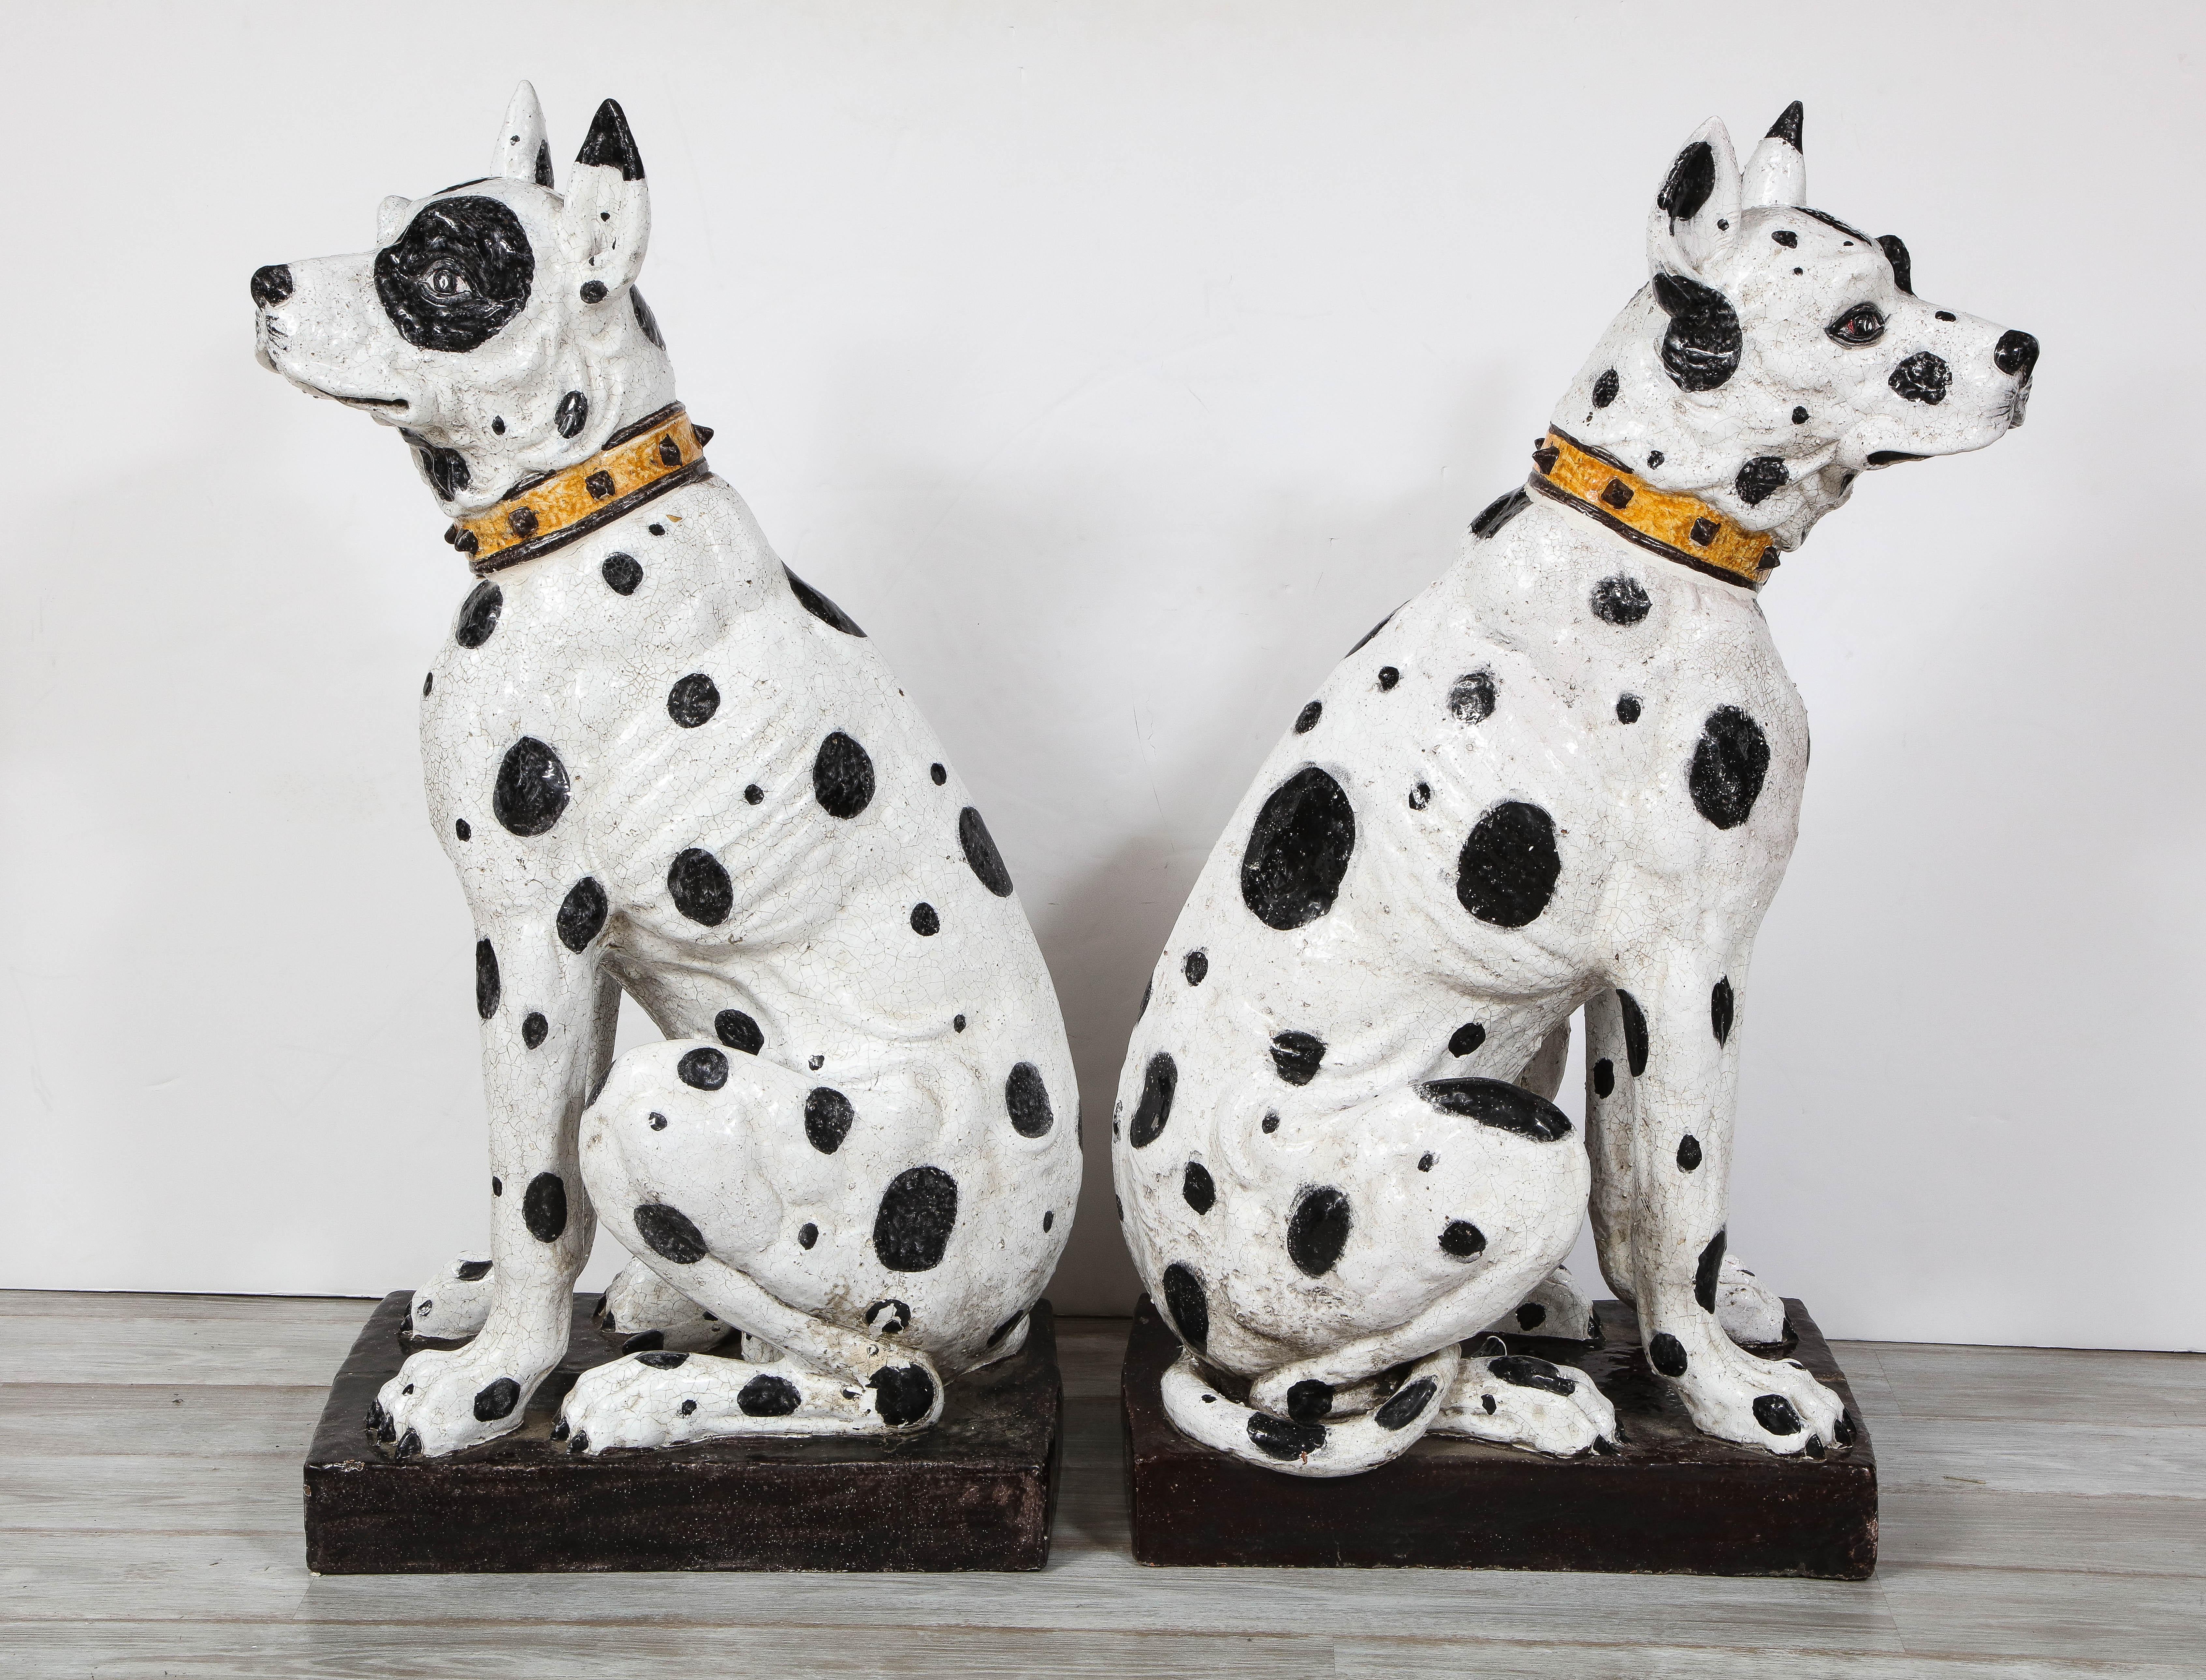 A majestic pair of Mid-Century Modern Italian life-size black and white ceramic Great Dane dogs depicted in two different seated stances on black bases that are exquisitely rendered in realistic anatomical details with sweet facial expressions.